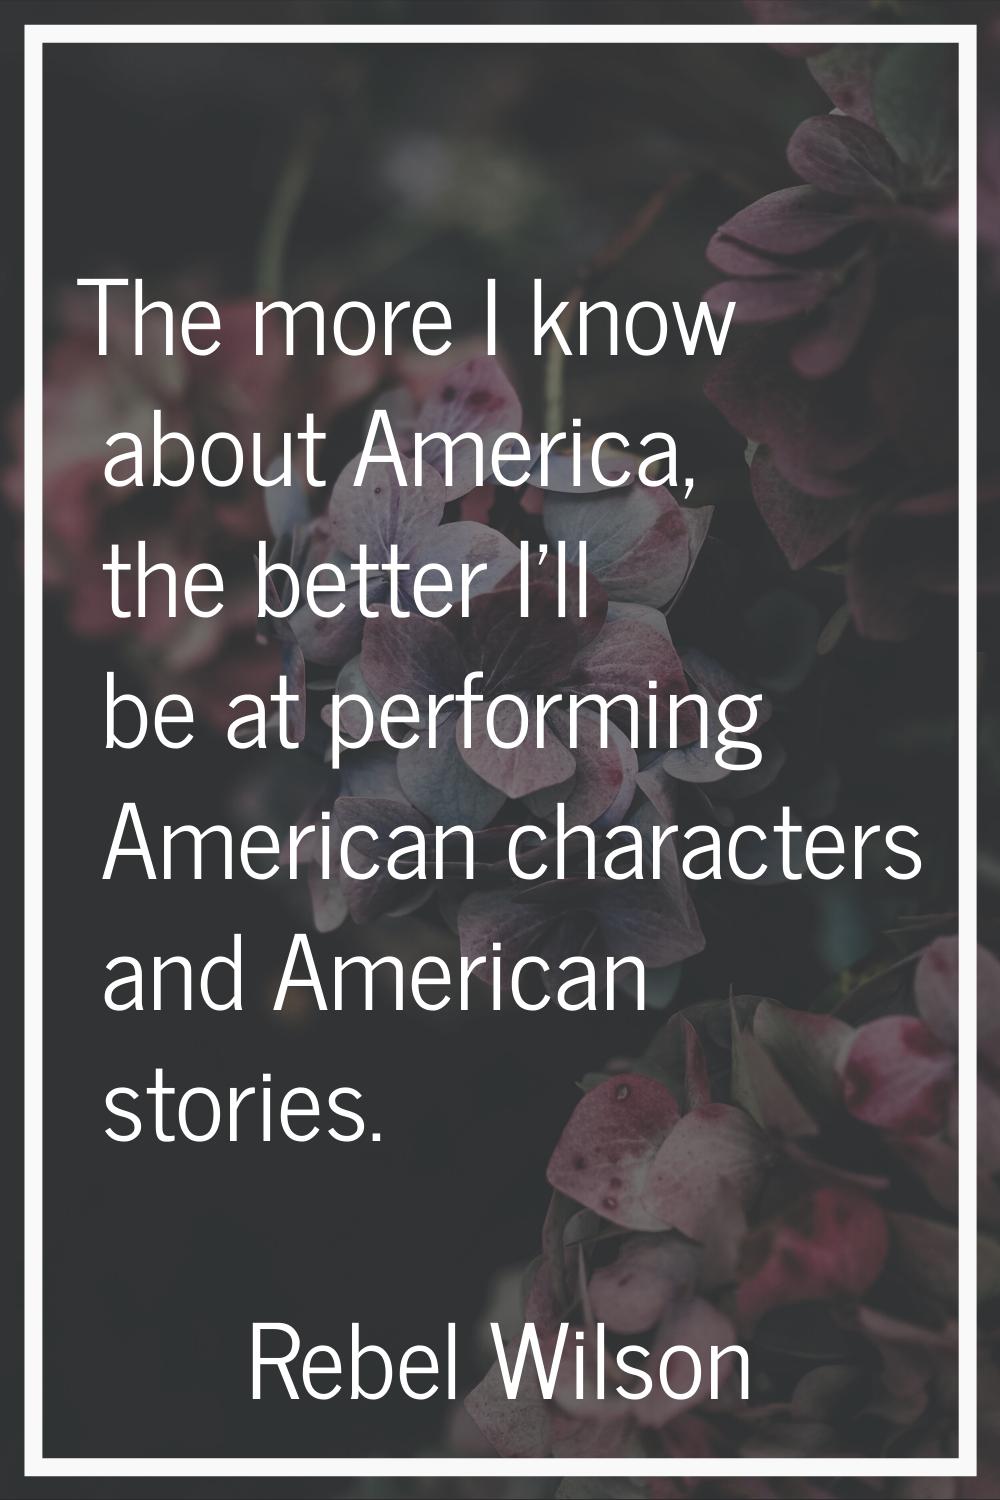 The more I know about America, the better I'll be at performing American characters and American st